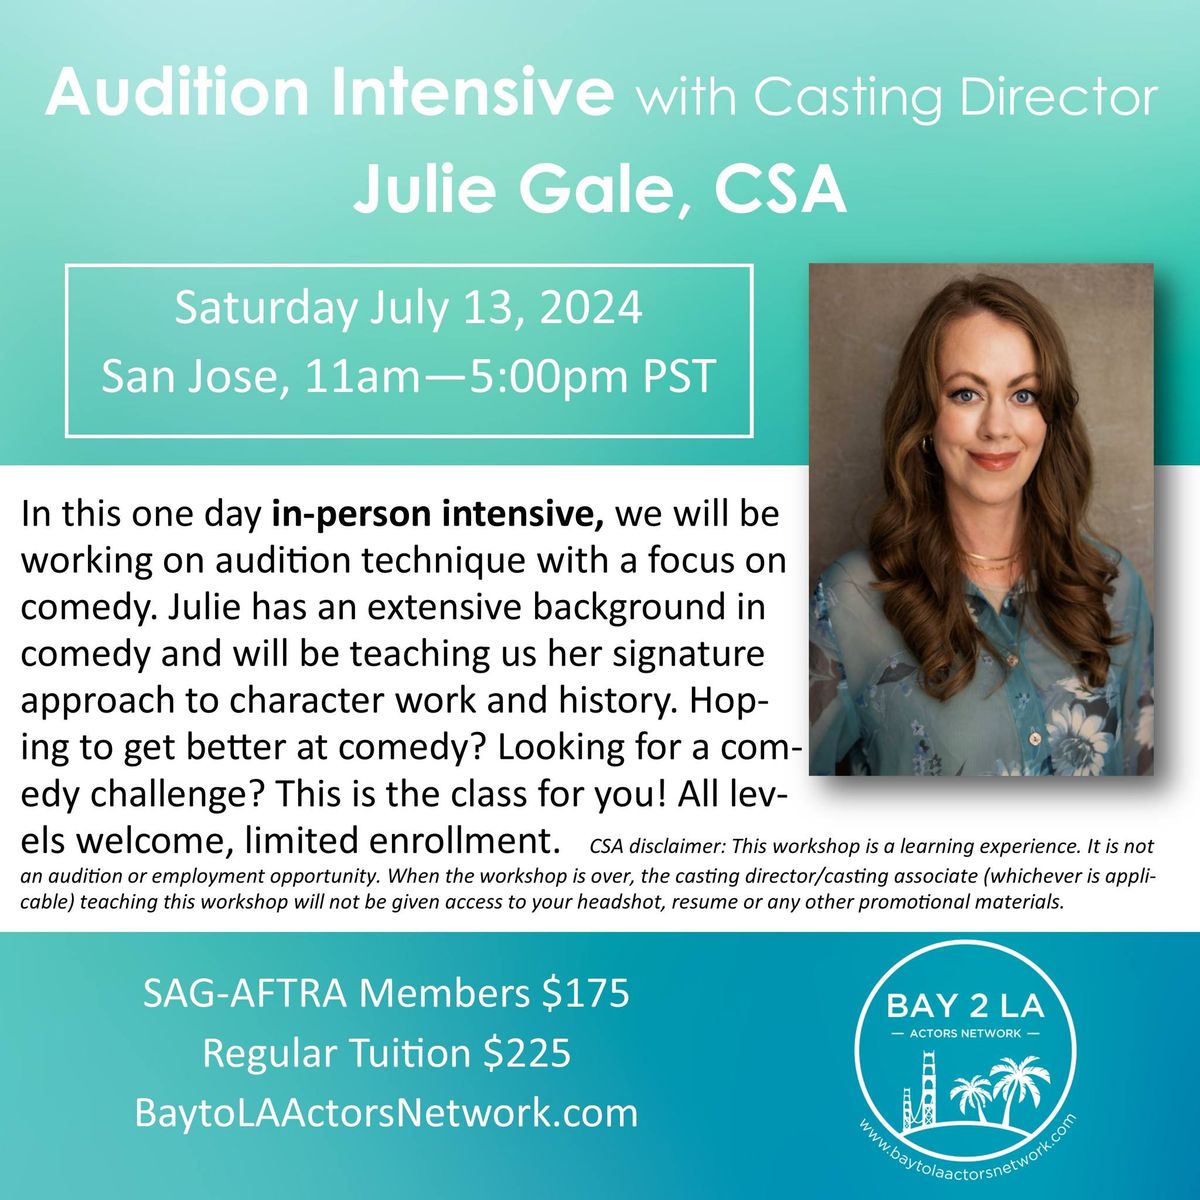 Audition Intensive with Julie Gale, CSA